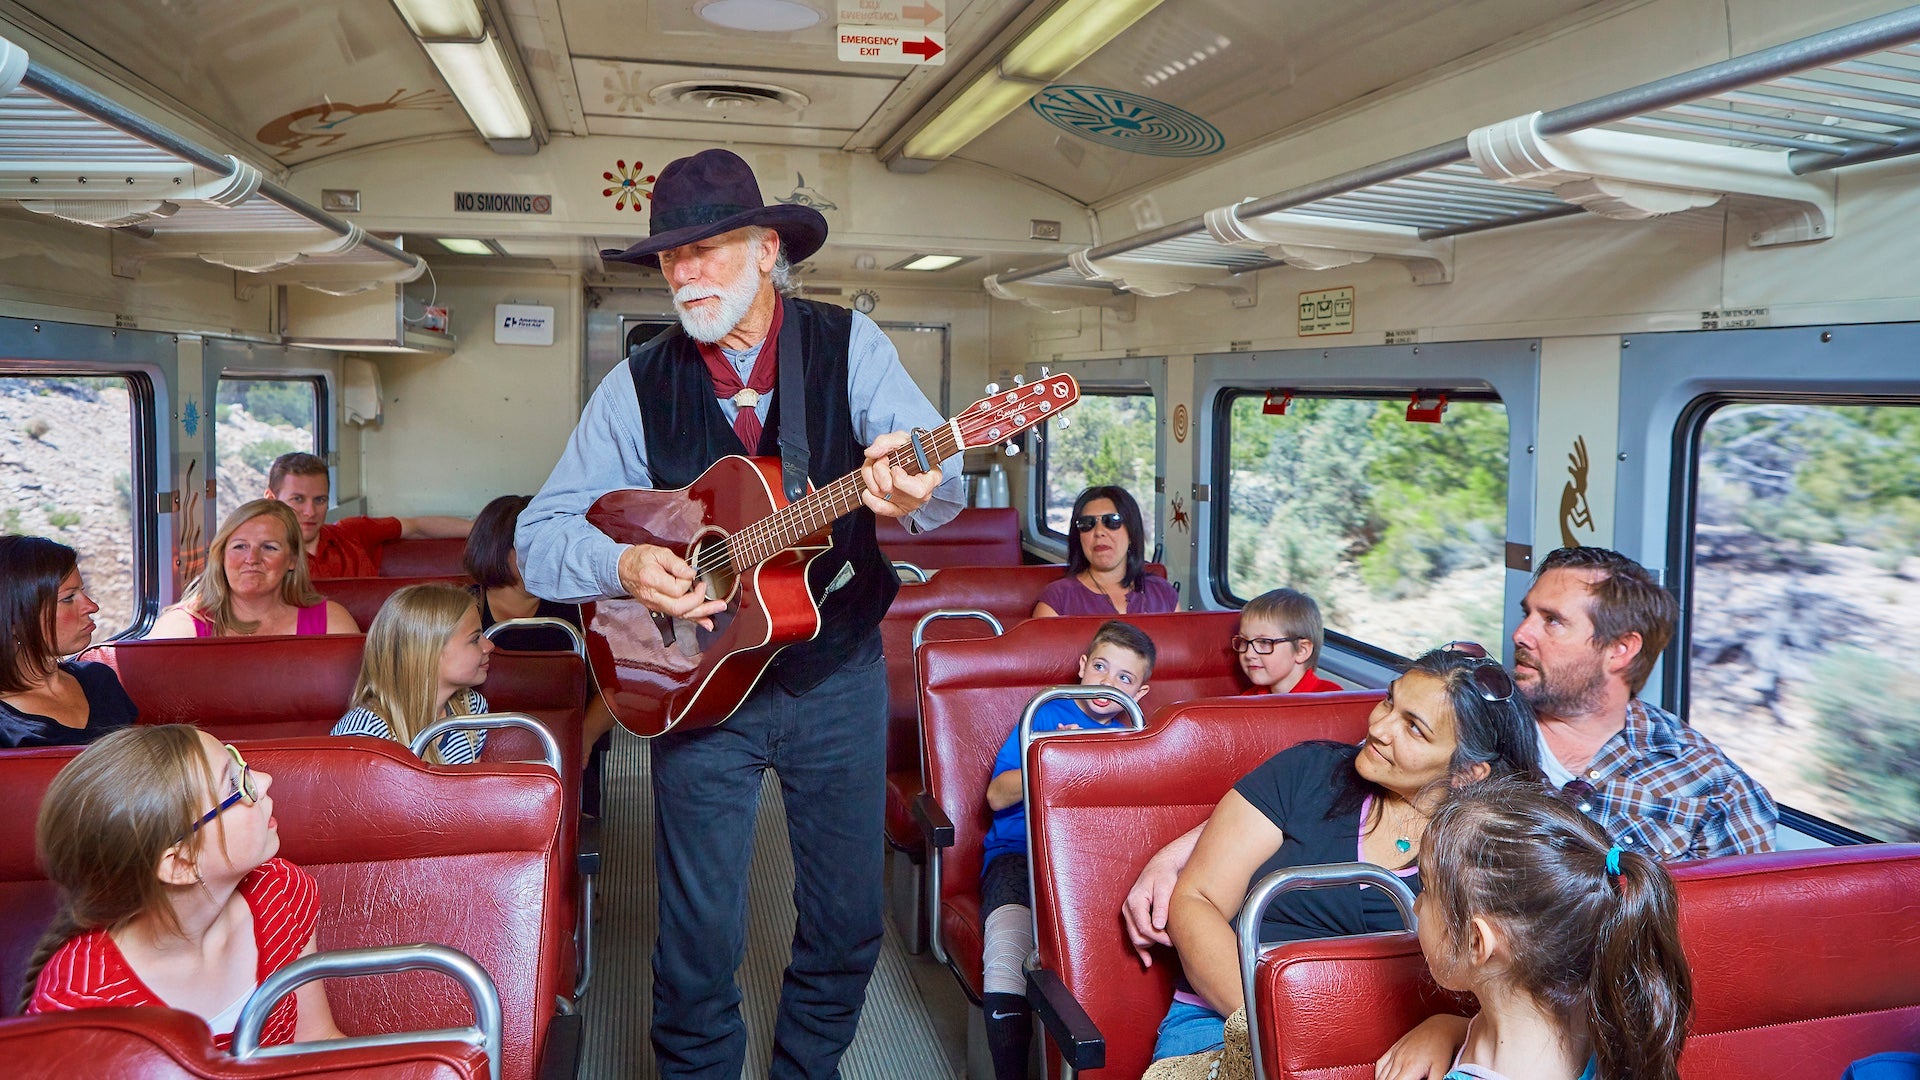 Man in western wear playing a guitar to a train car full of people sitting in red booths